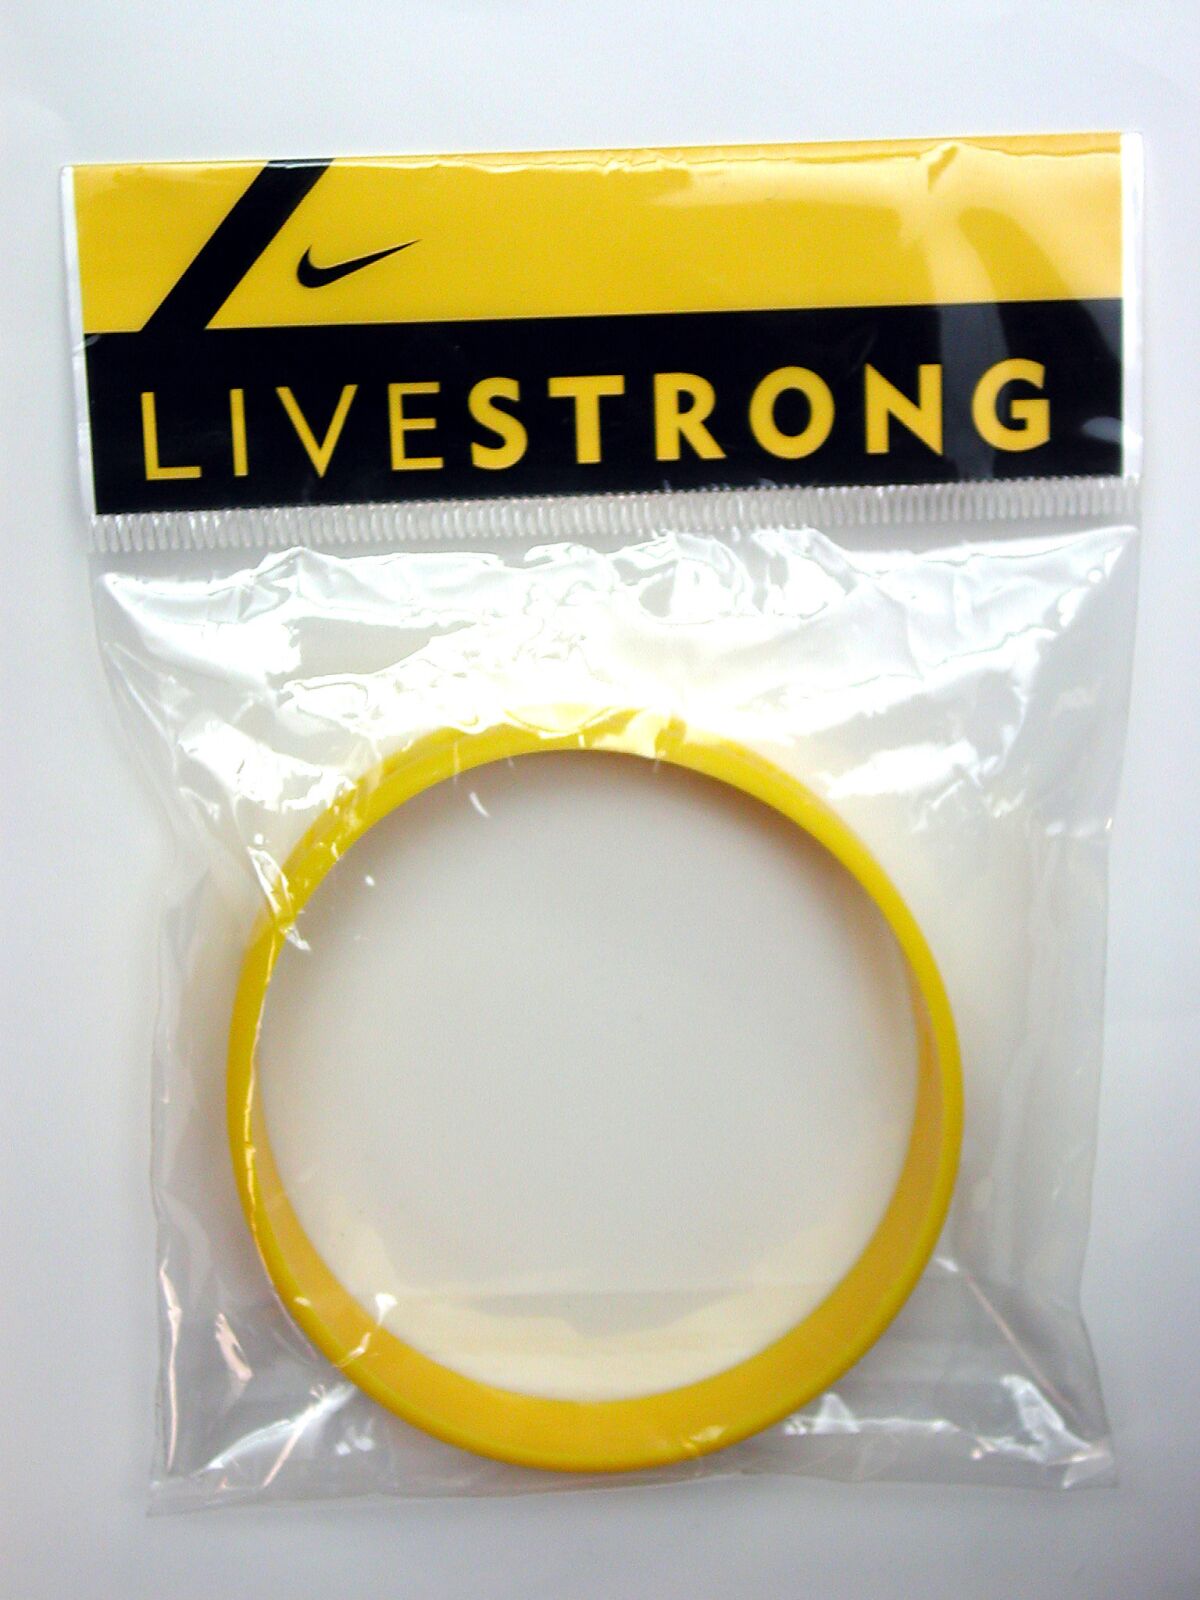 Nike cuts ties with Livestrong, the cancer charity founded by disgraced cyclist Lance Armstrong.